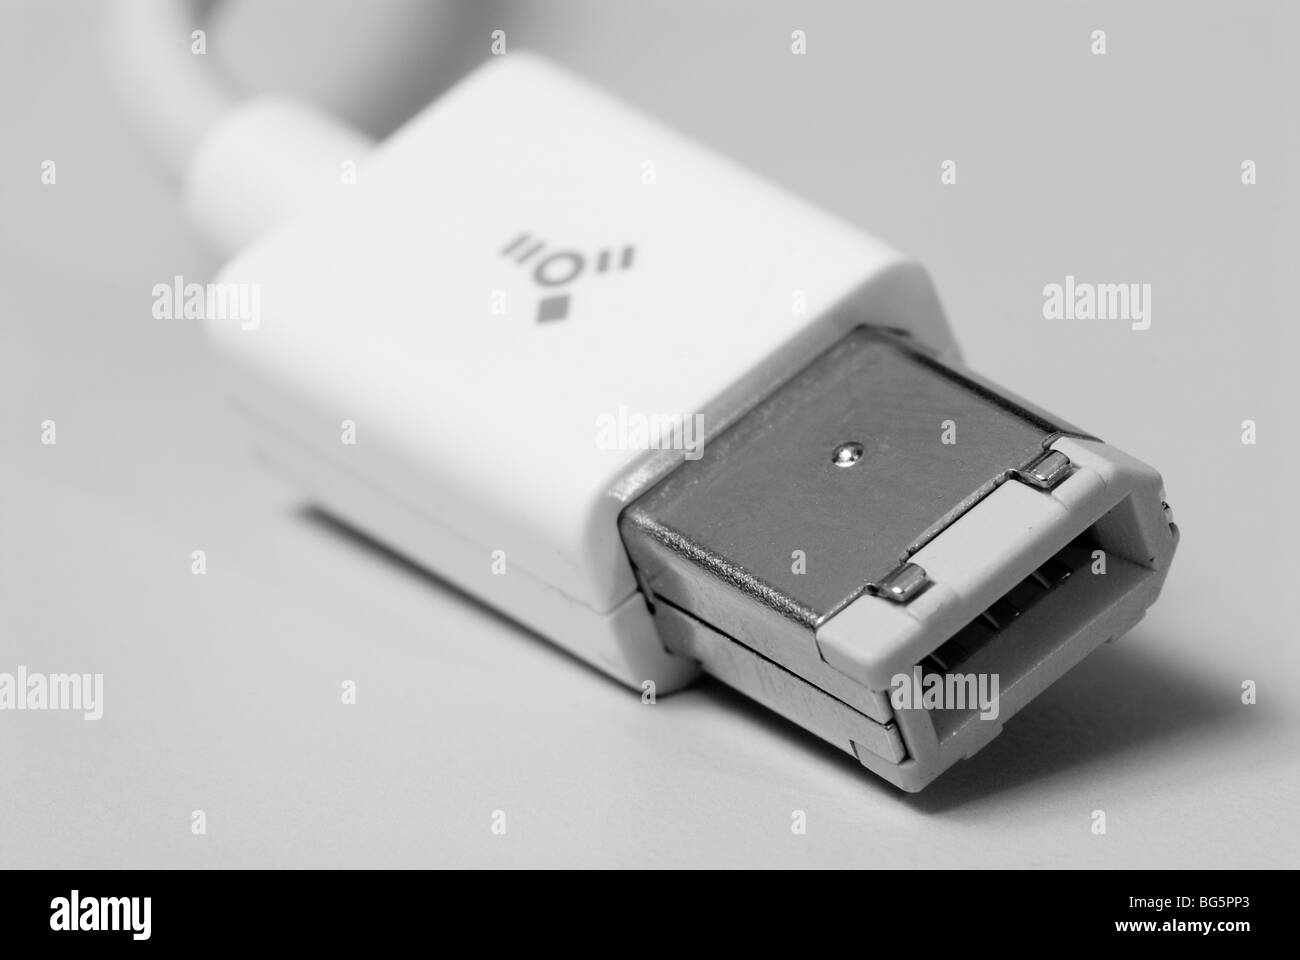 Close up of Firewire 400 data transfer connectivity cord. Stock Photo